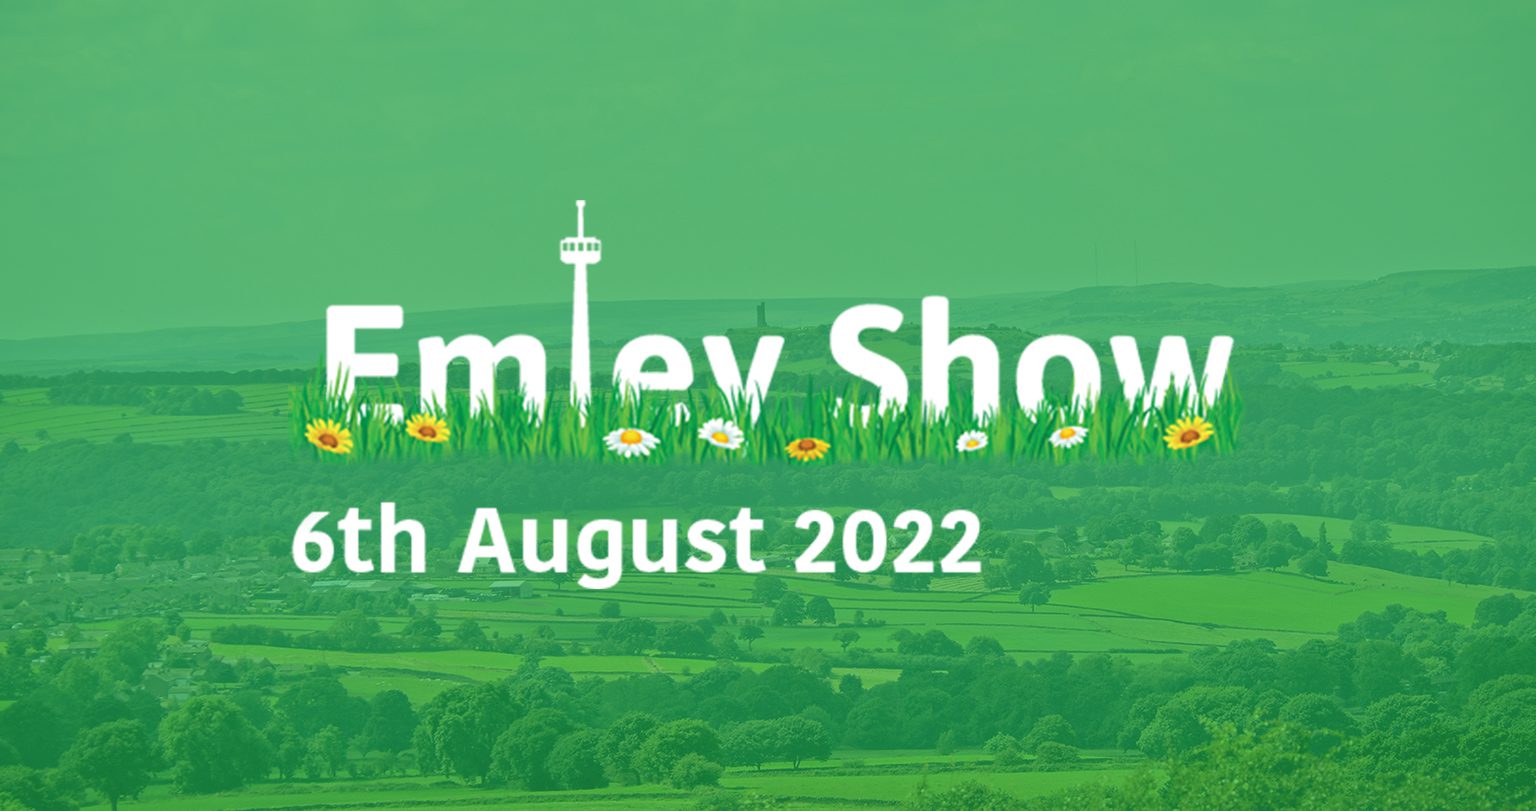 Emley Show 6th August 2022